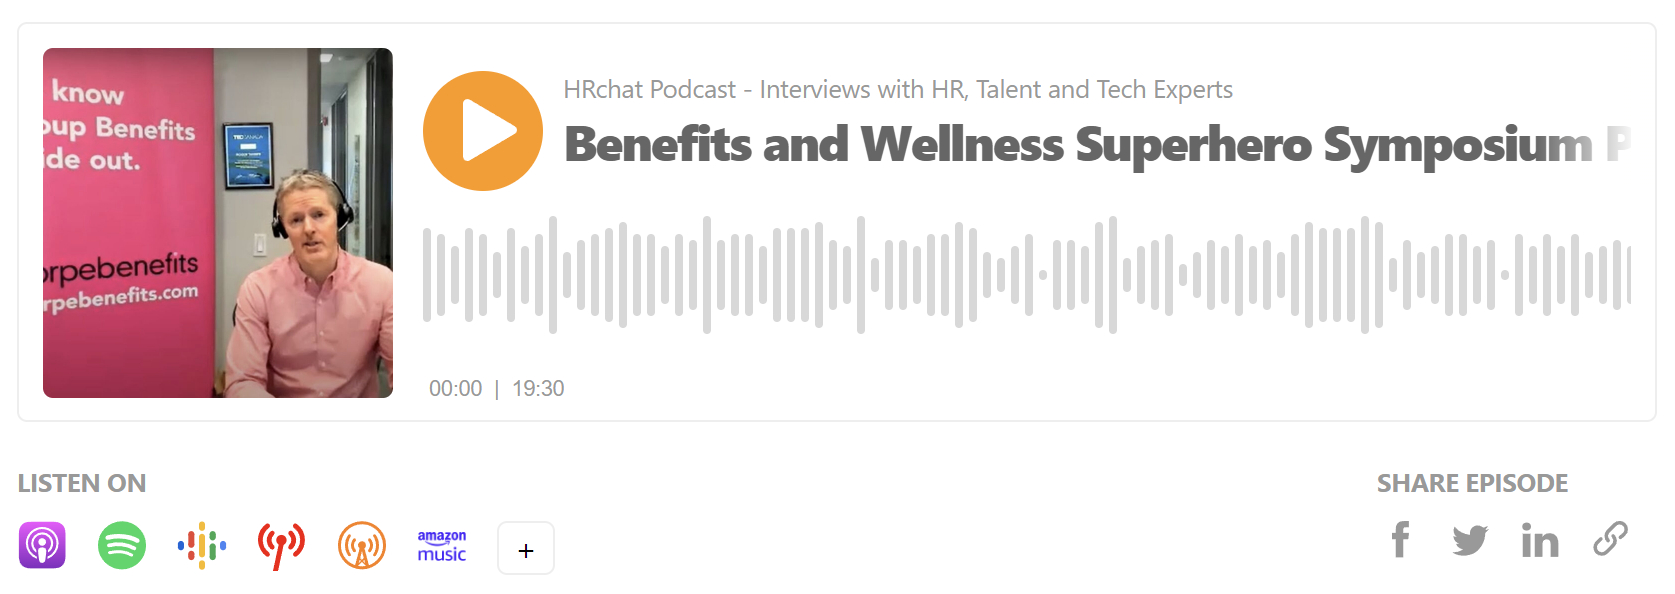 employee benefits and wellness with Roger Thorpe on HRchat Podcast